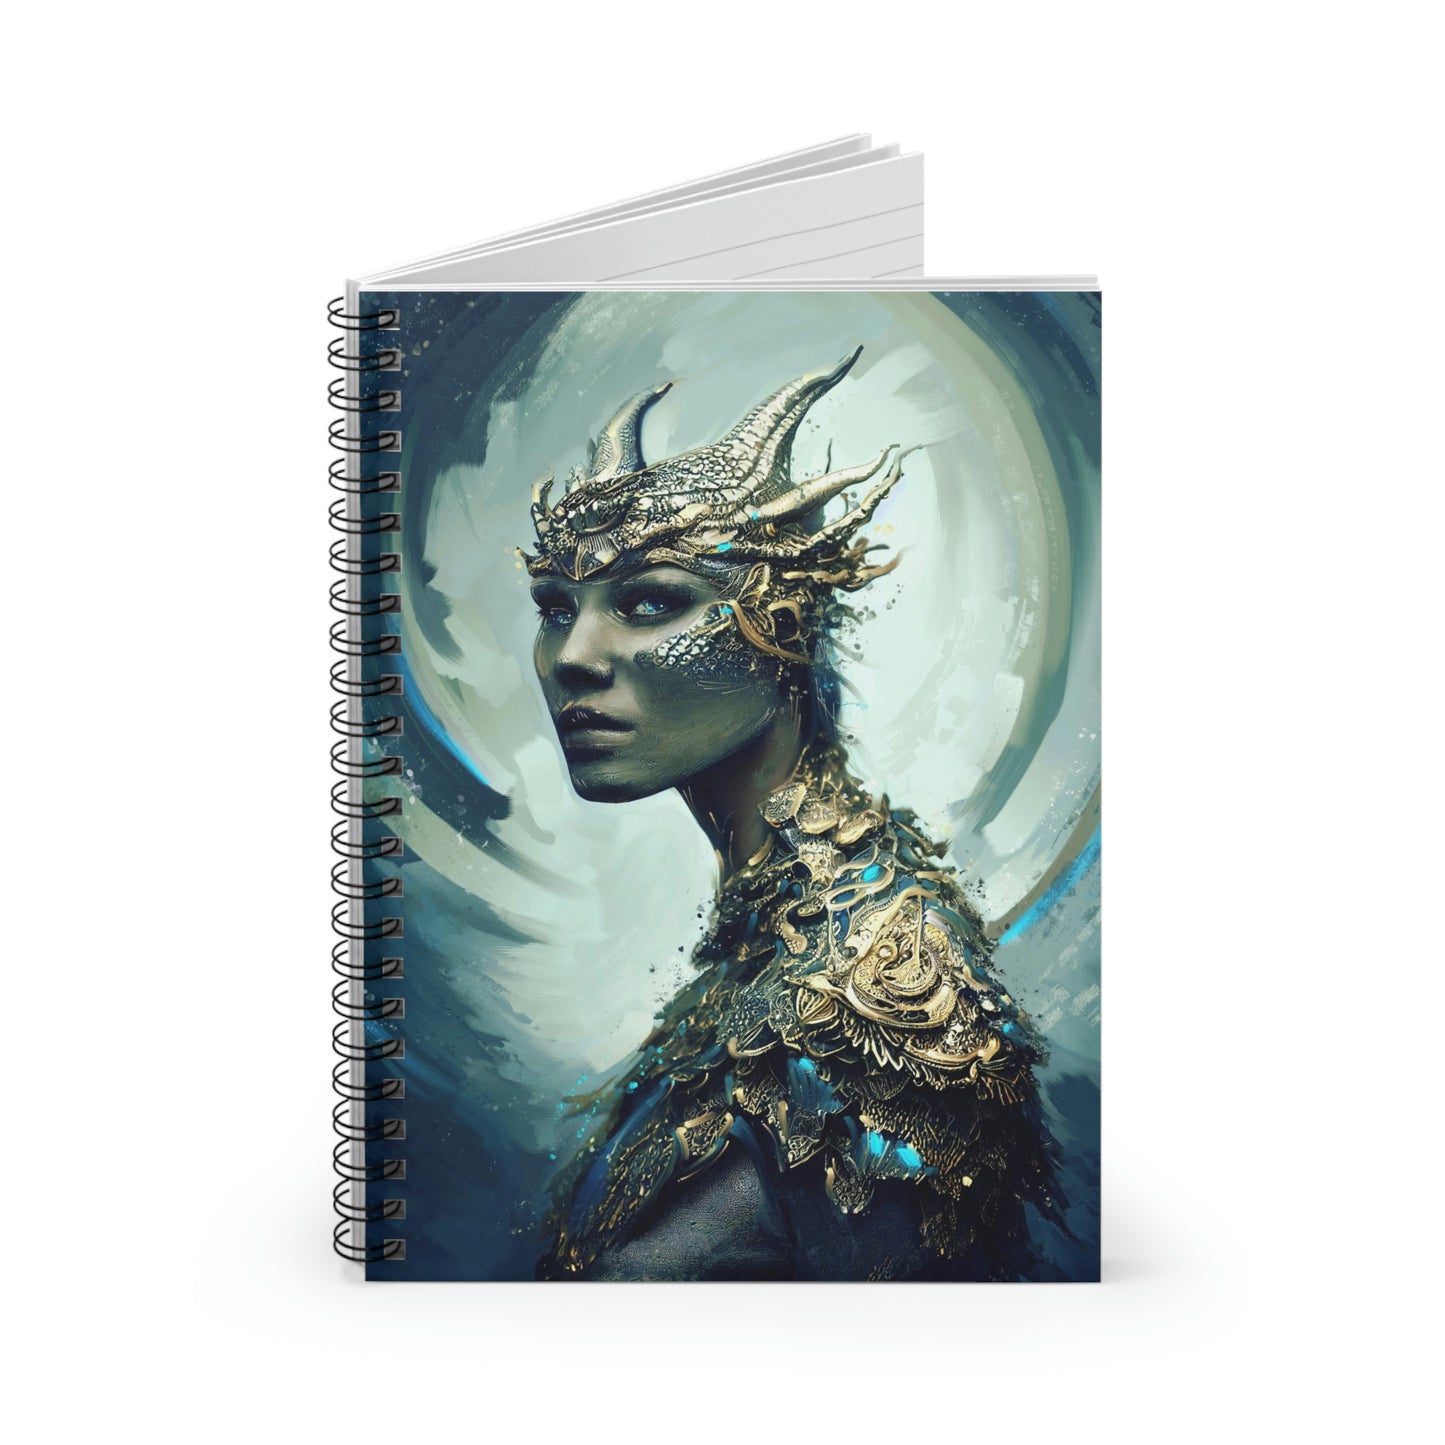 Sea Dragon Spiral Notebook - Ruled Line